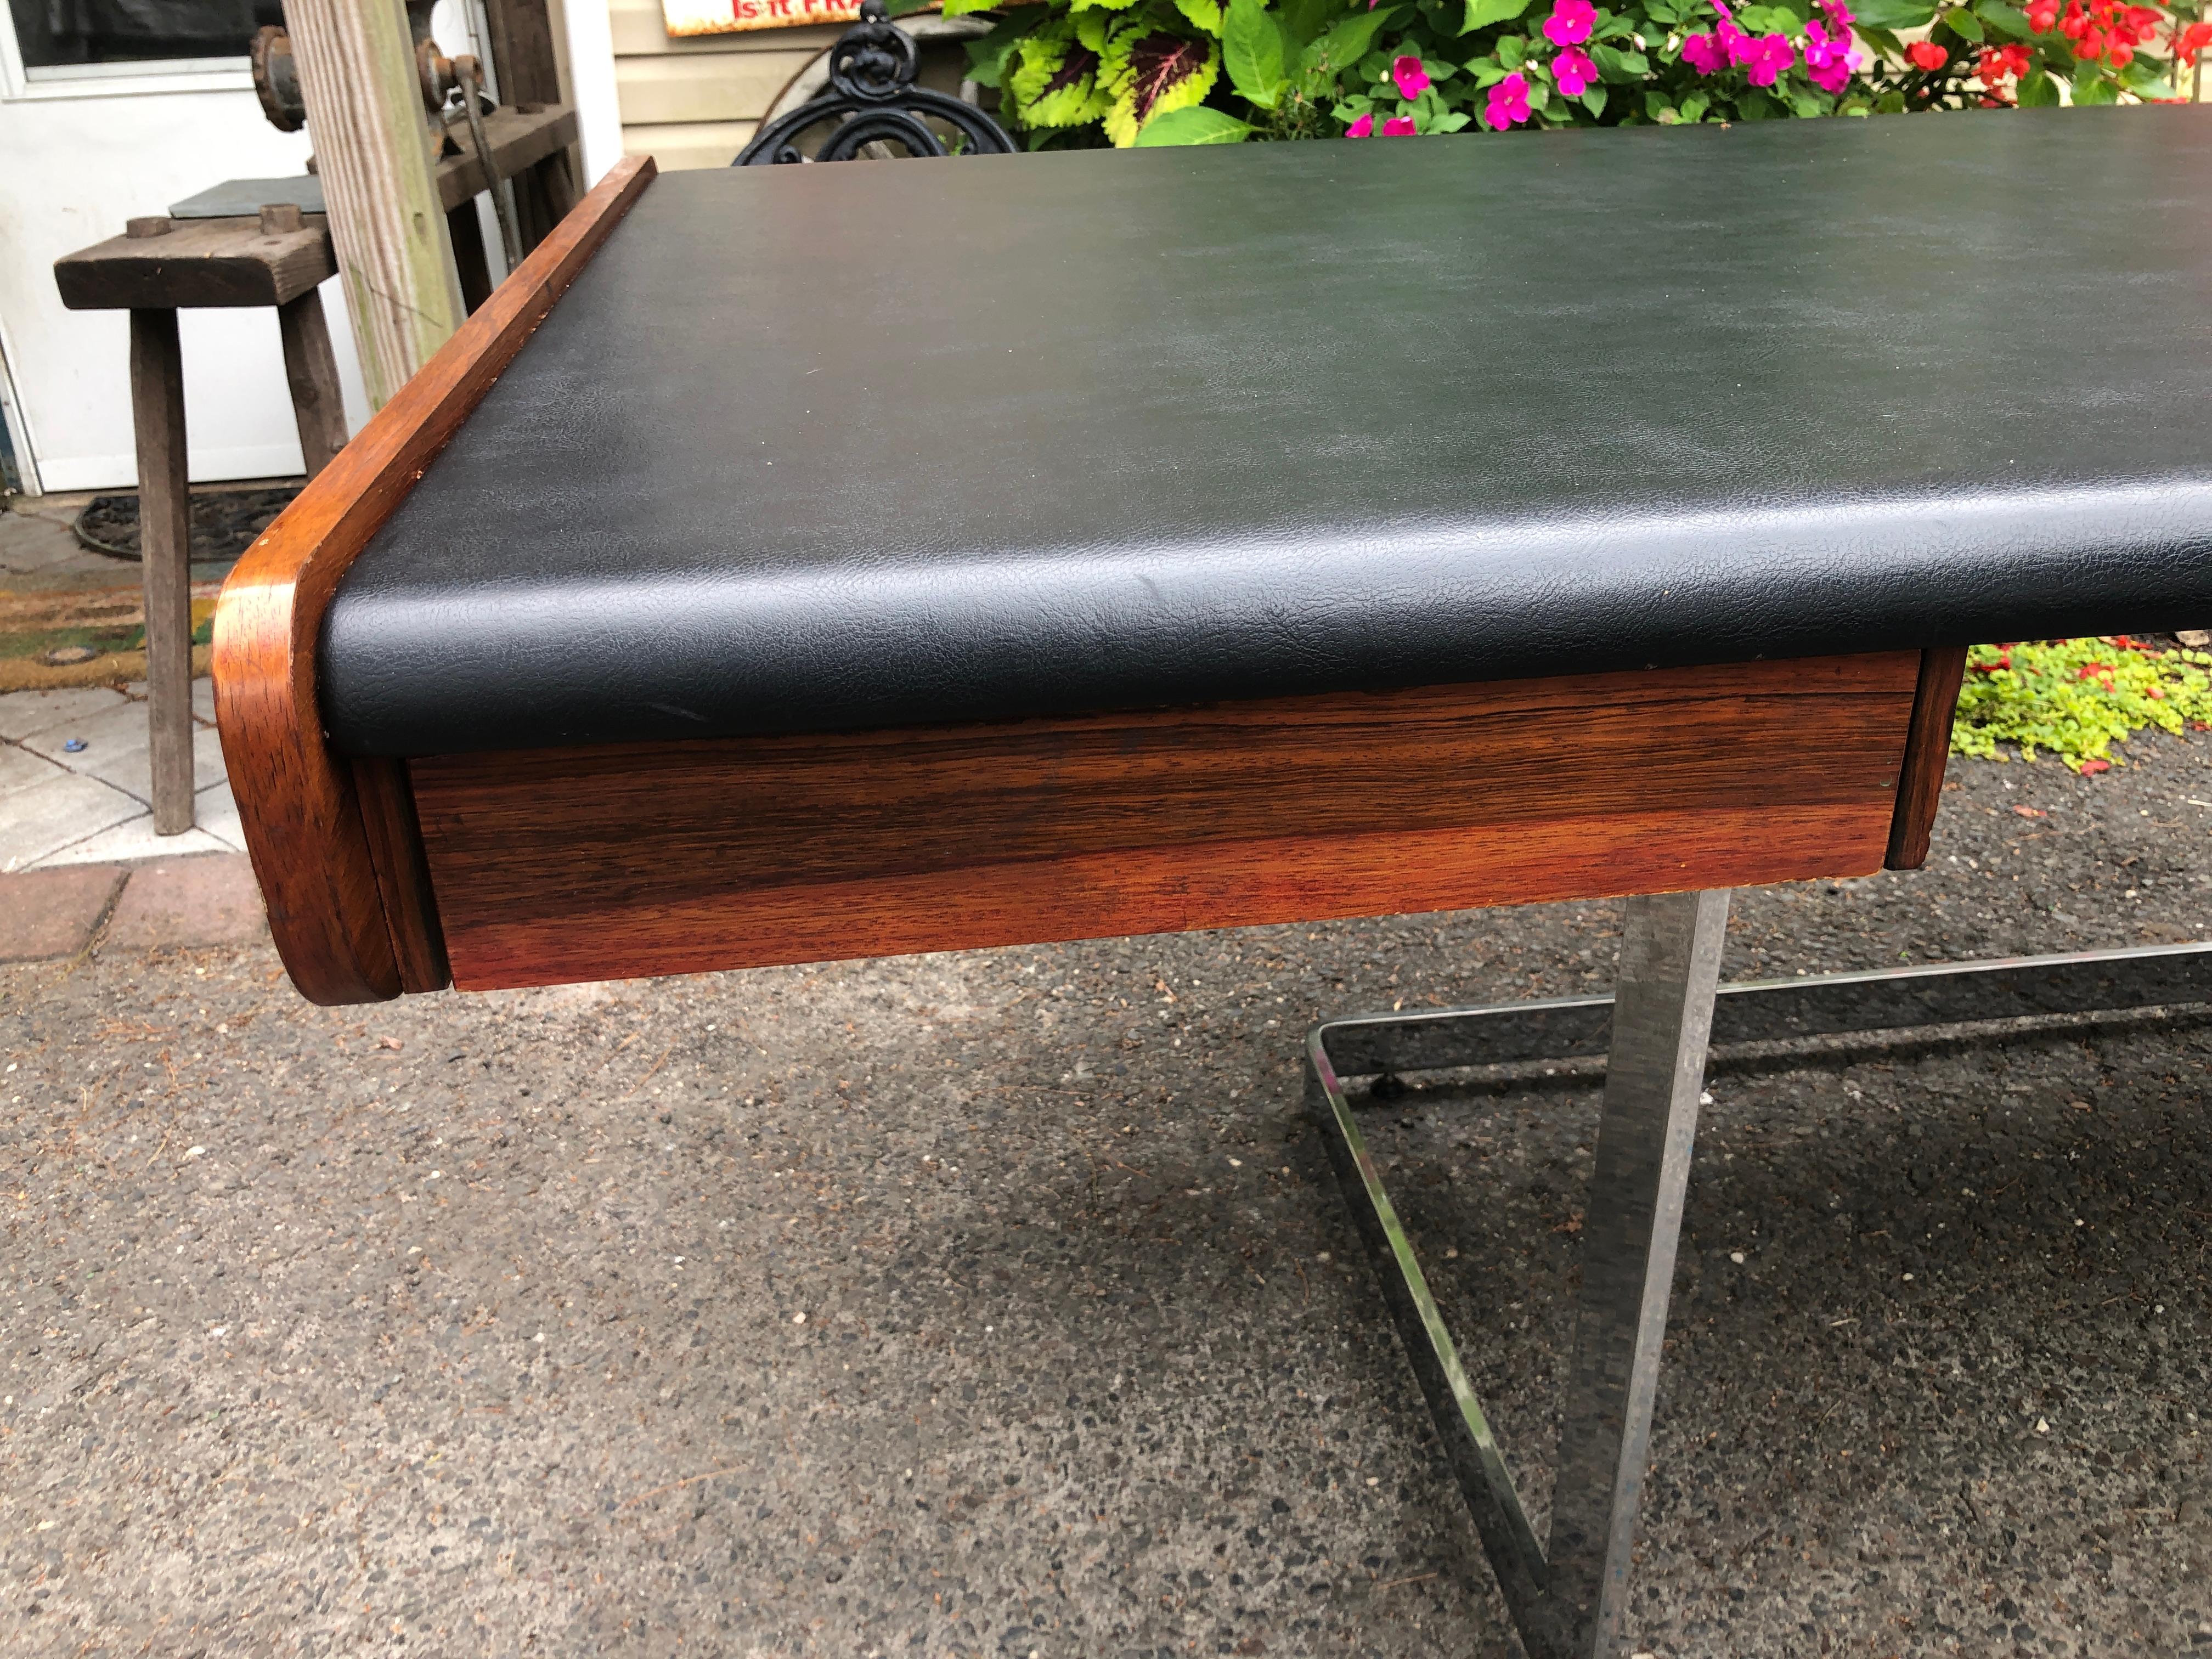 This sexy slim Ste-Marie and Laurent desk has beautiful rosewood grain and a black faux leather top. This Mid-Century desk floats on a modern chrome cantilever base and is finished on all sides. It measures 28.5